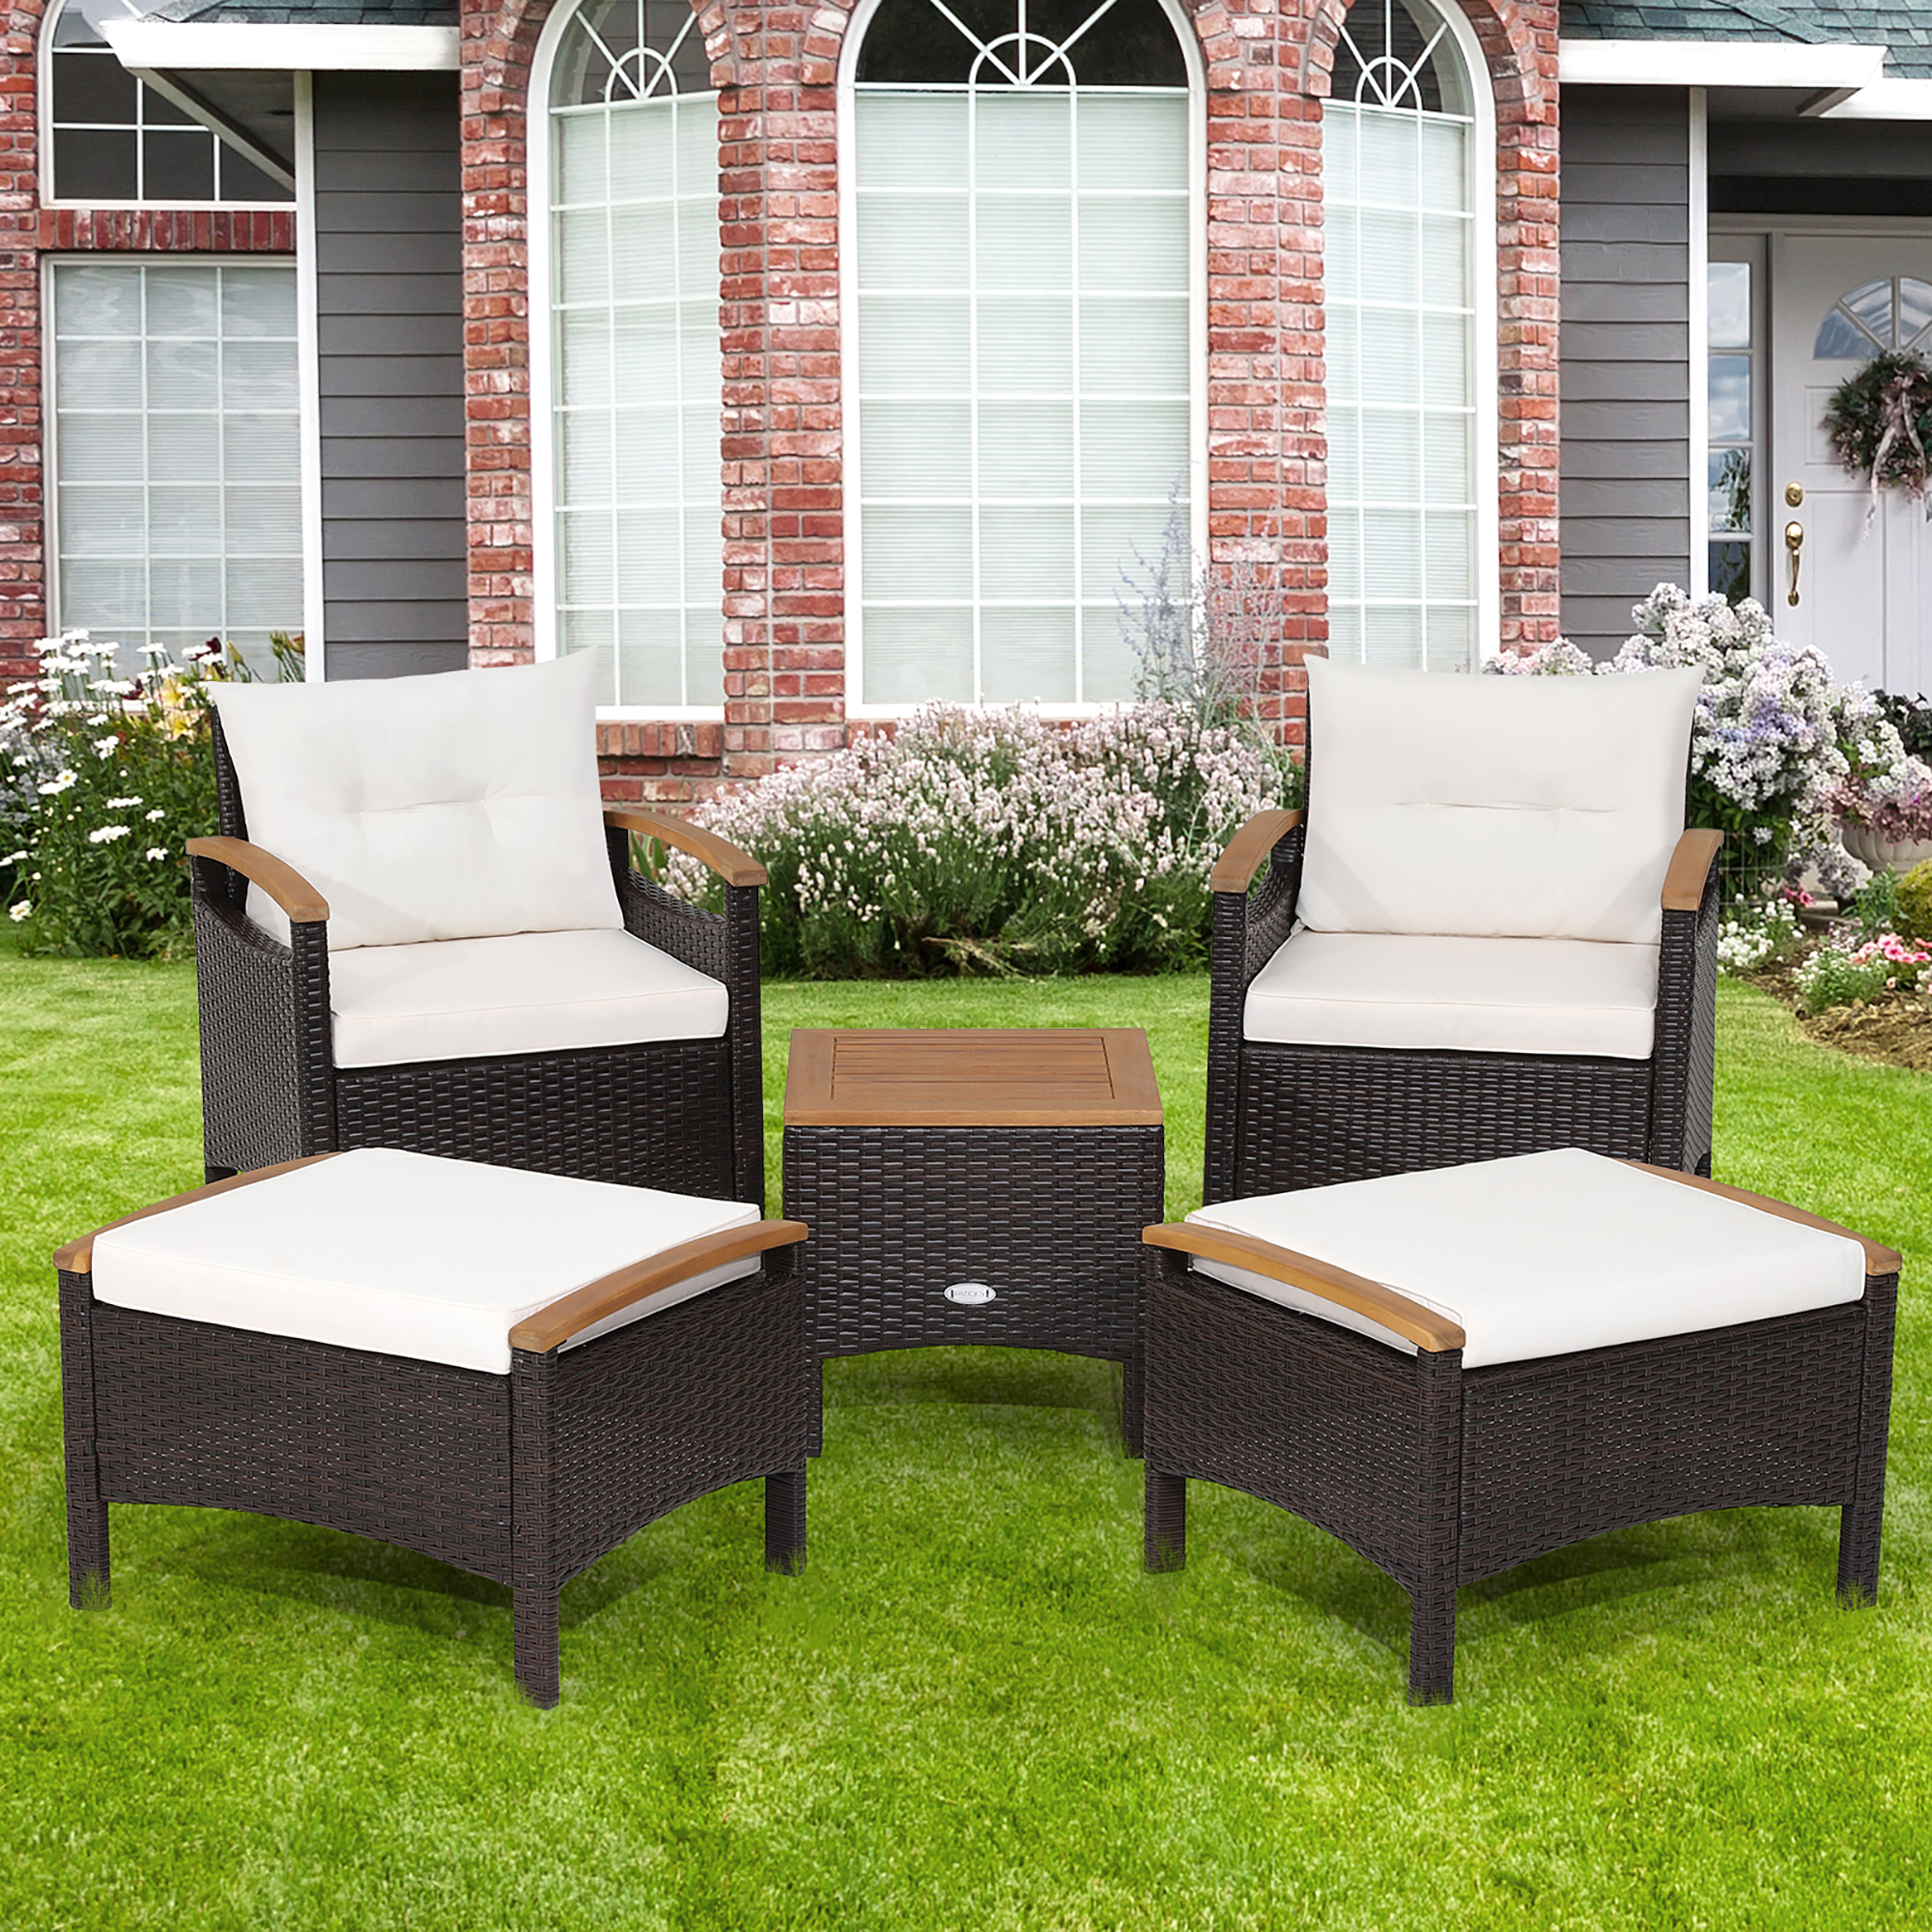 Gymax 5PCS Outdoor Patio Rattan Furniture Set PE Wicker Lounge Chair w/ Wood Tabletop - image 1 of 10